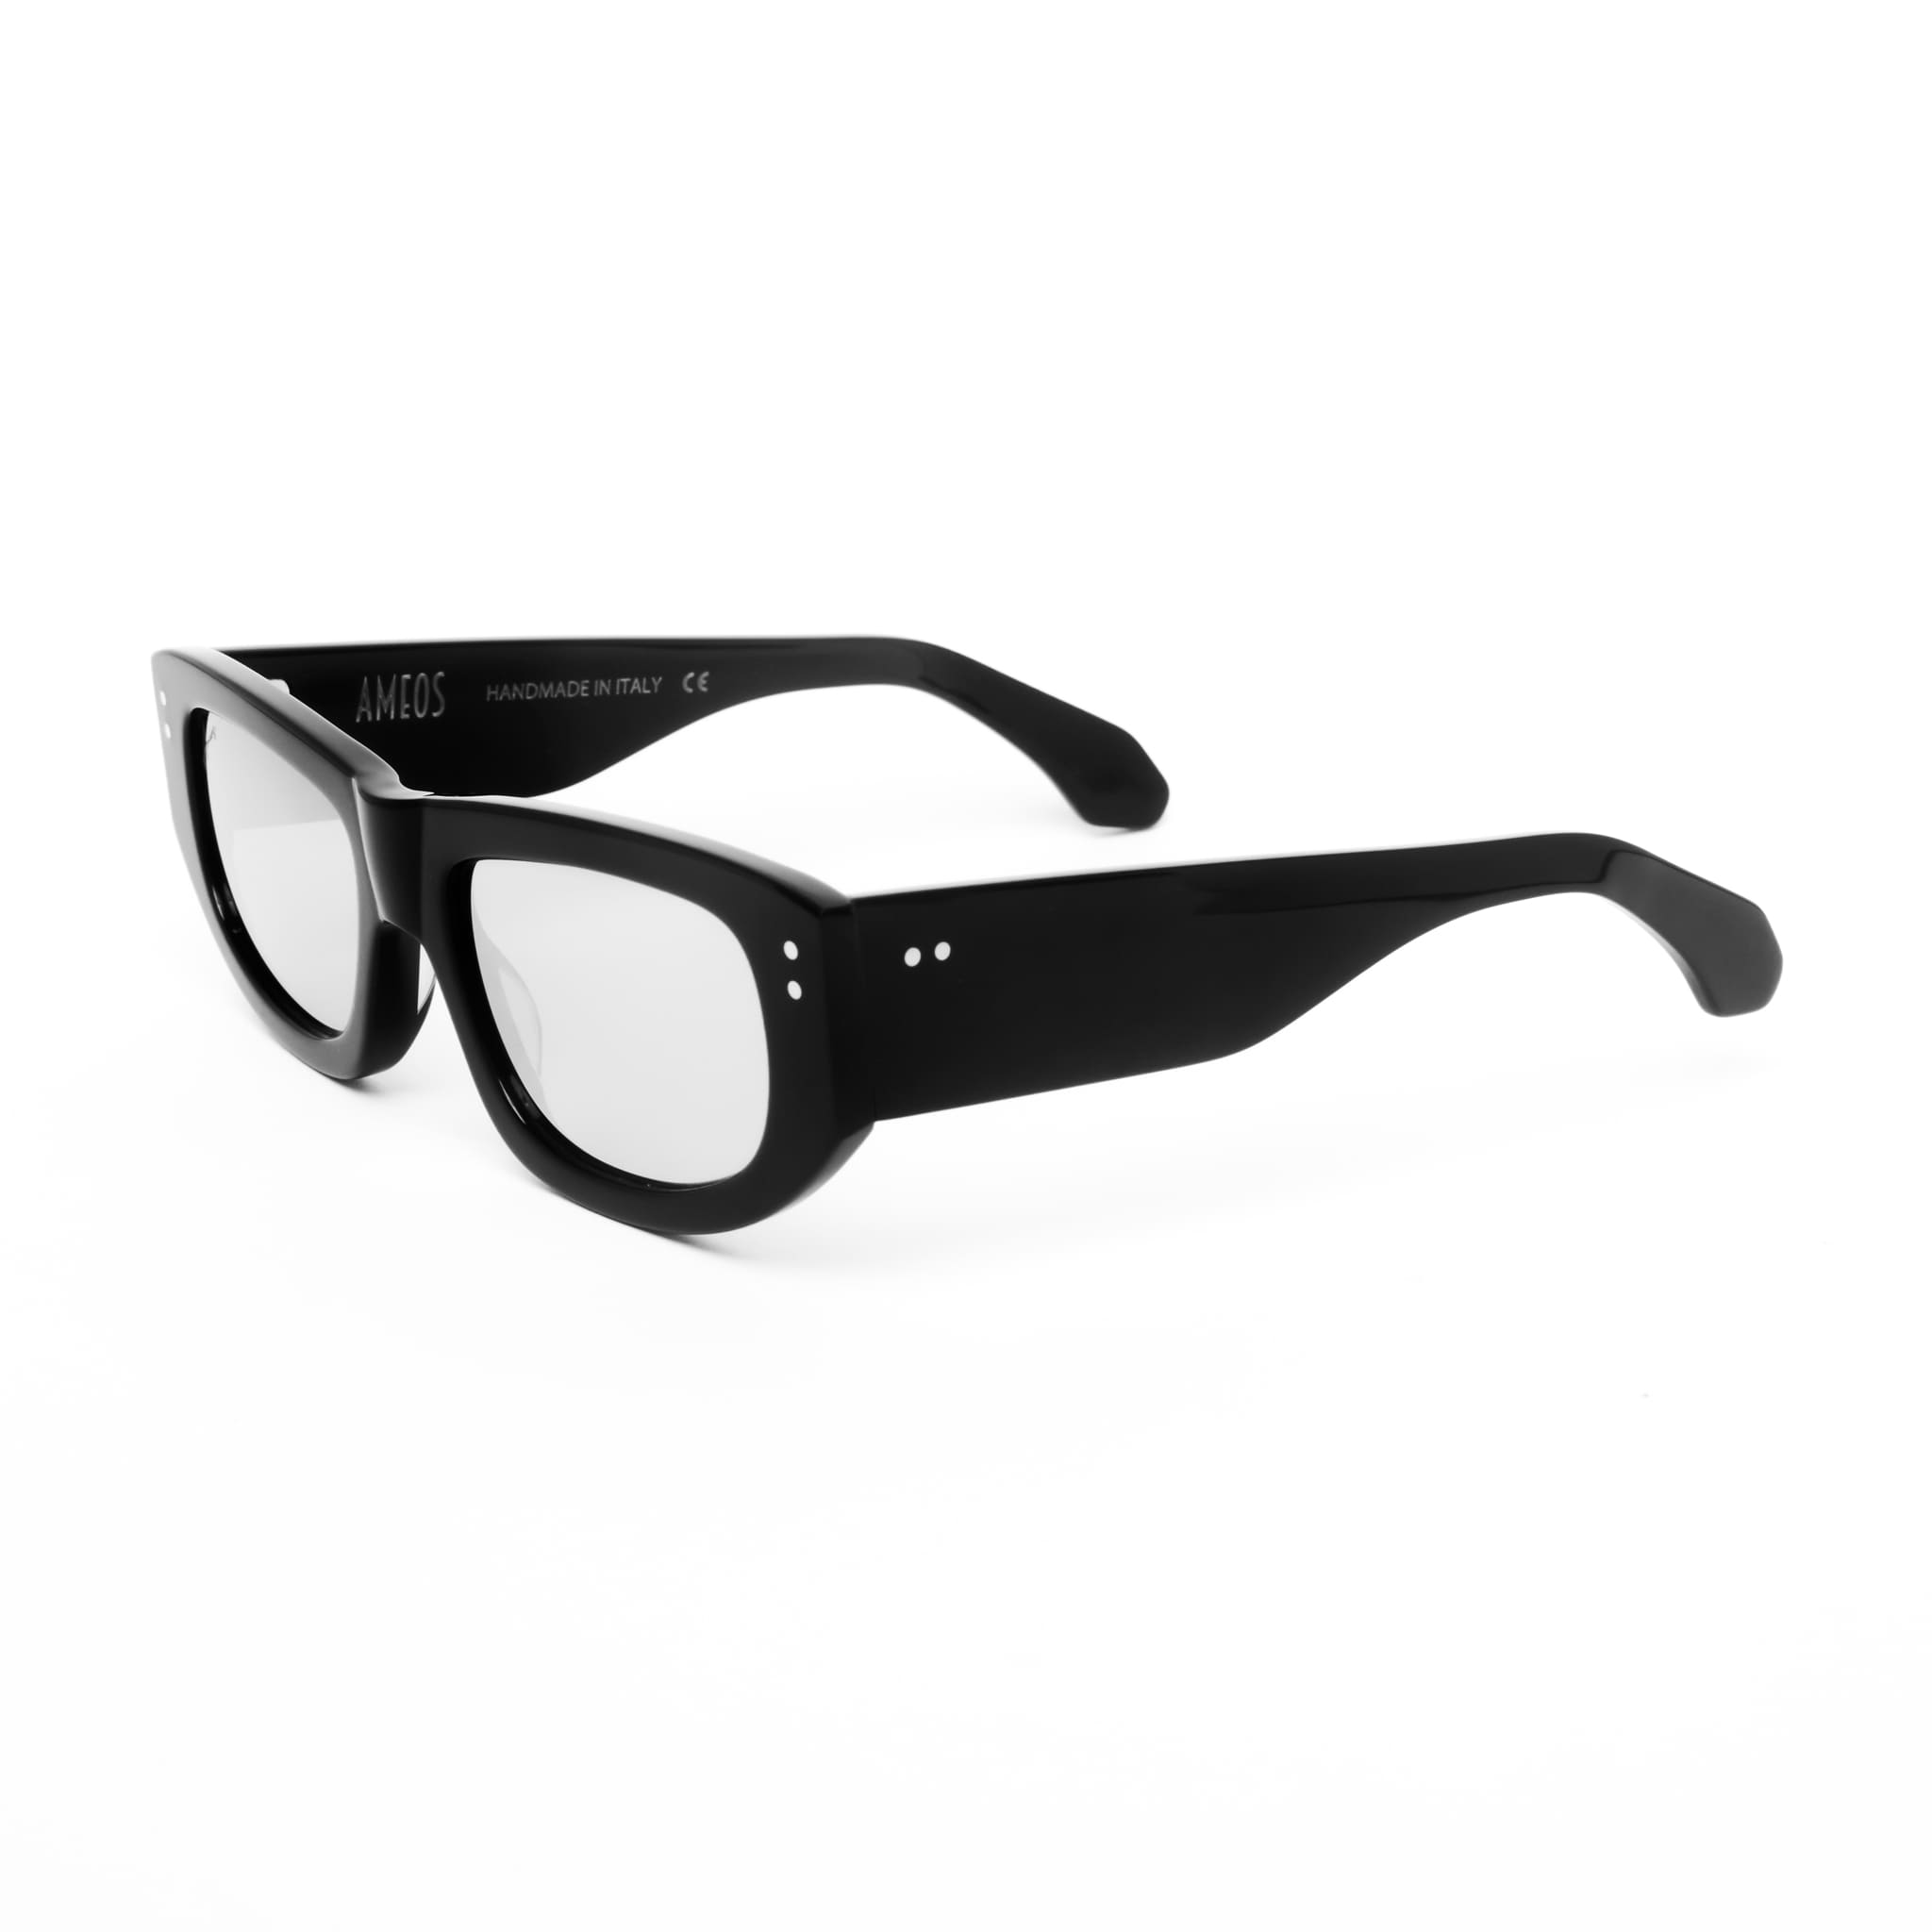 Ameos Forever collection Dex model. Black frames with silver, reflective lenses. Side view. Genderless, gender neutral eyewear